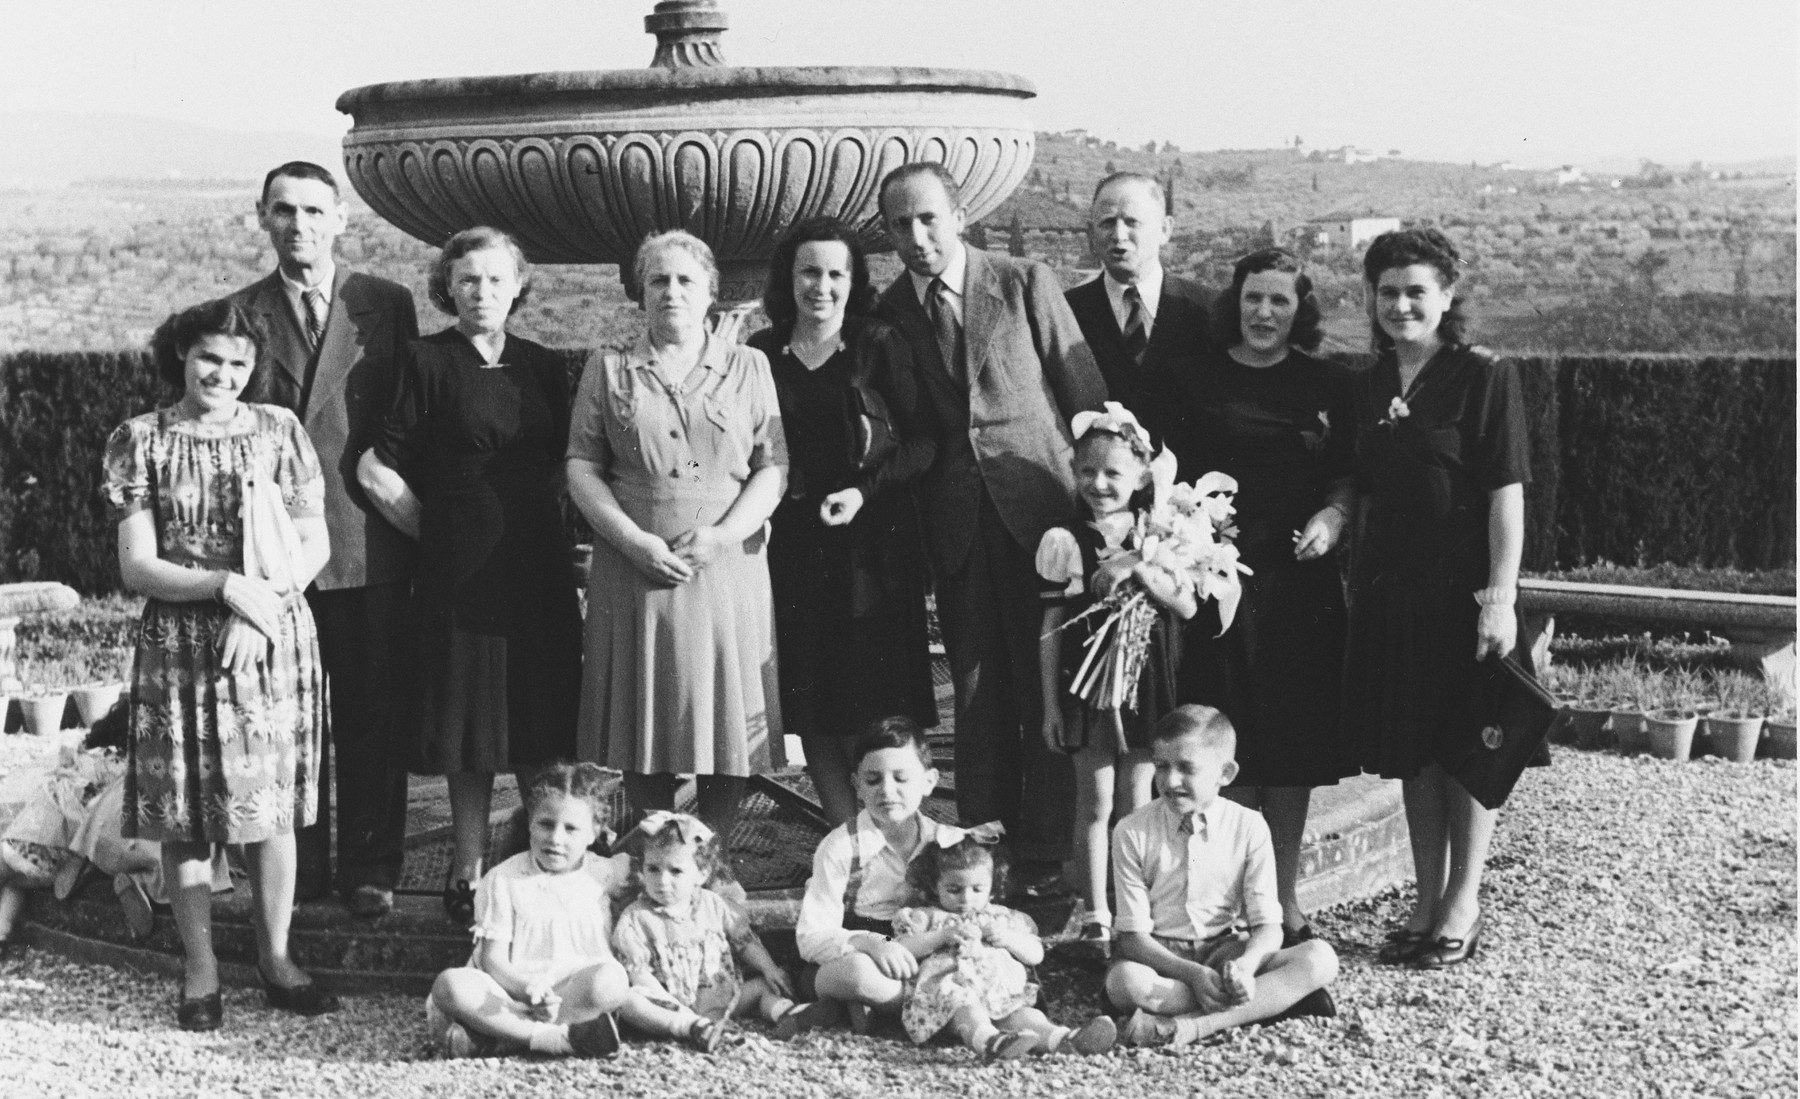 Group portrait of members of a kibbutz hachshara (Zionist collective) in Ponte Emma (near Florence).

Among those pictured are members of the Telerant and Puzarisky families.